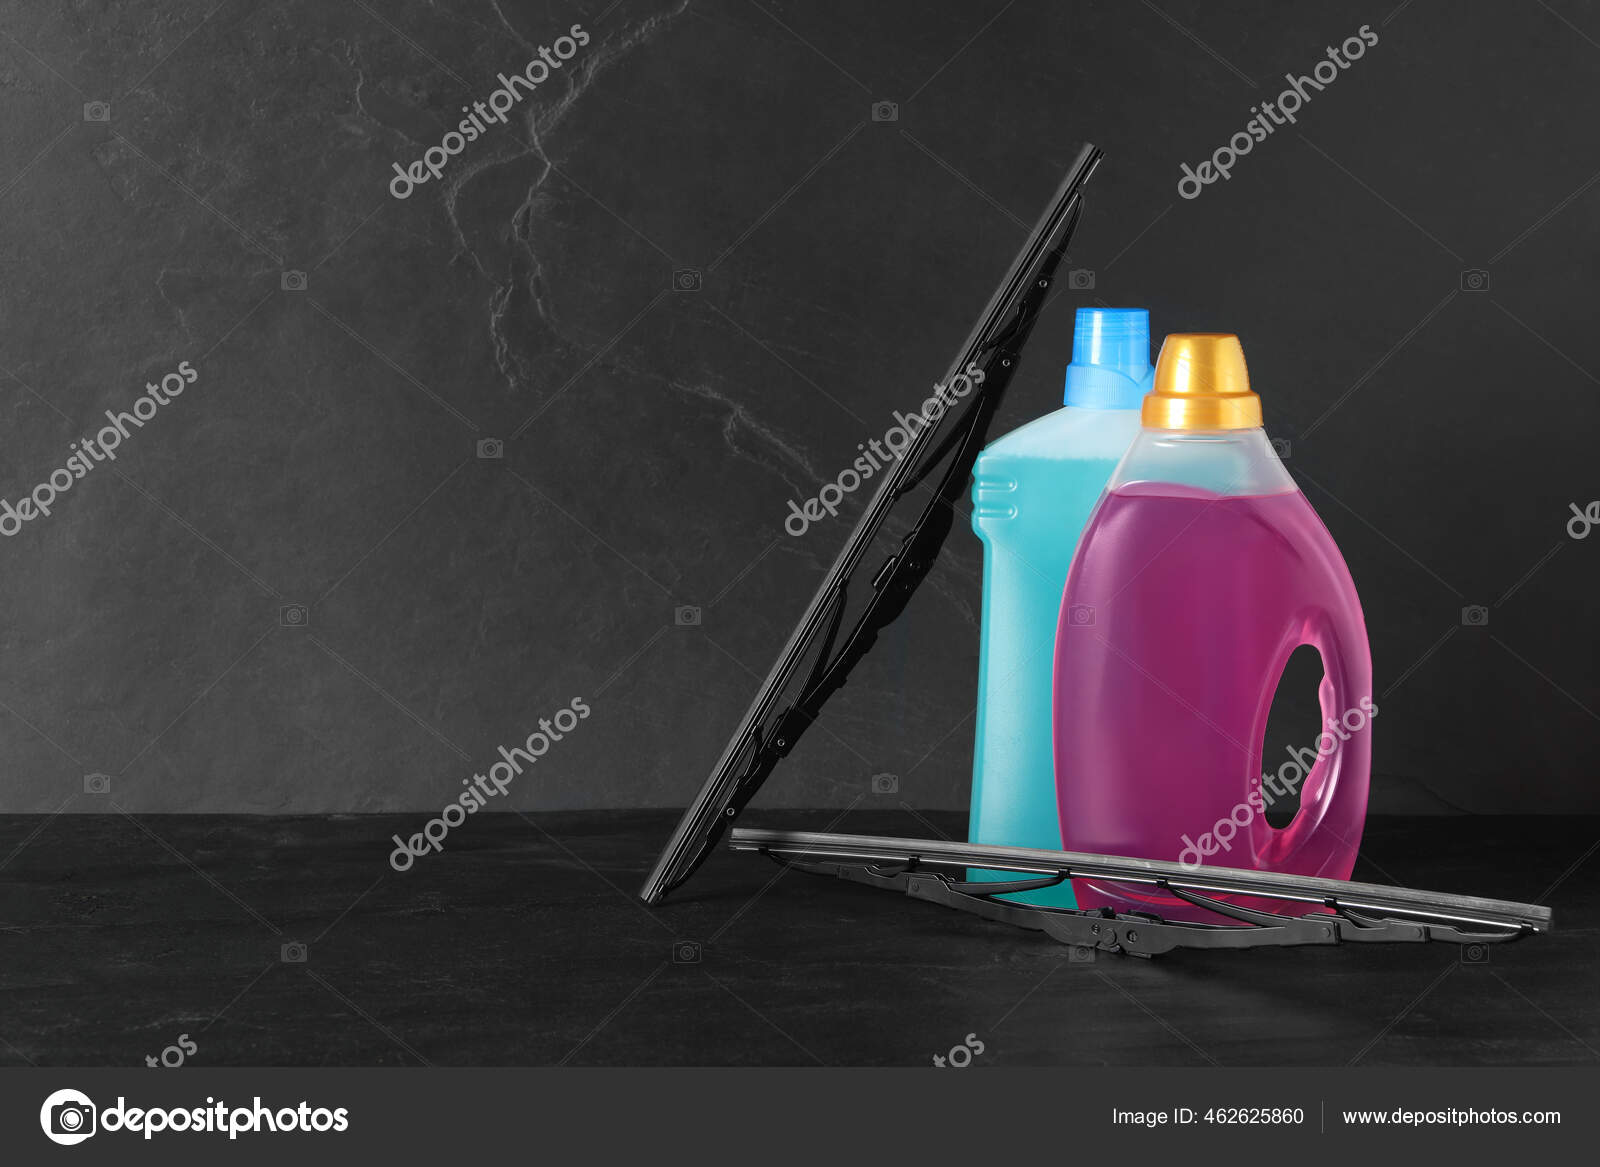 Bottles Windshield Washer Fluids Wipers Black Table Space Text